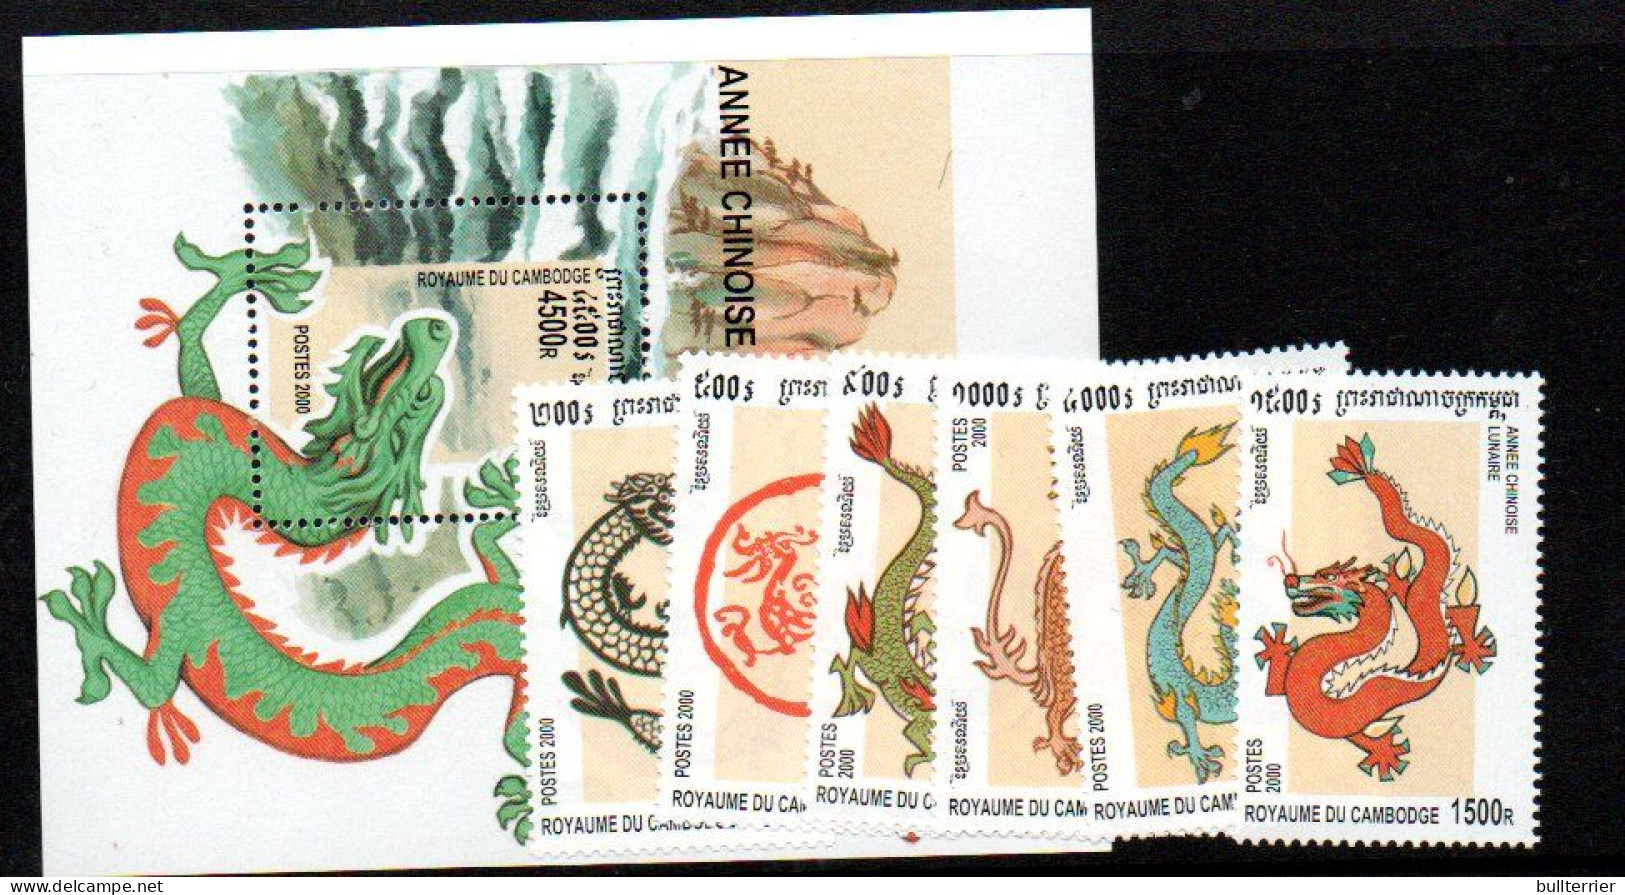 CAMBODIA - 2001- YEAR  OF THE DRAGON SET OF 6 + SOUVENIR SHEET  MINT NEVER HINGED - Cambodge